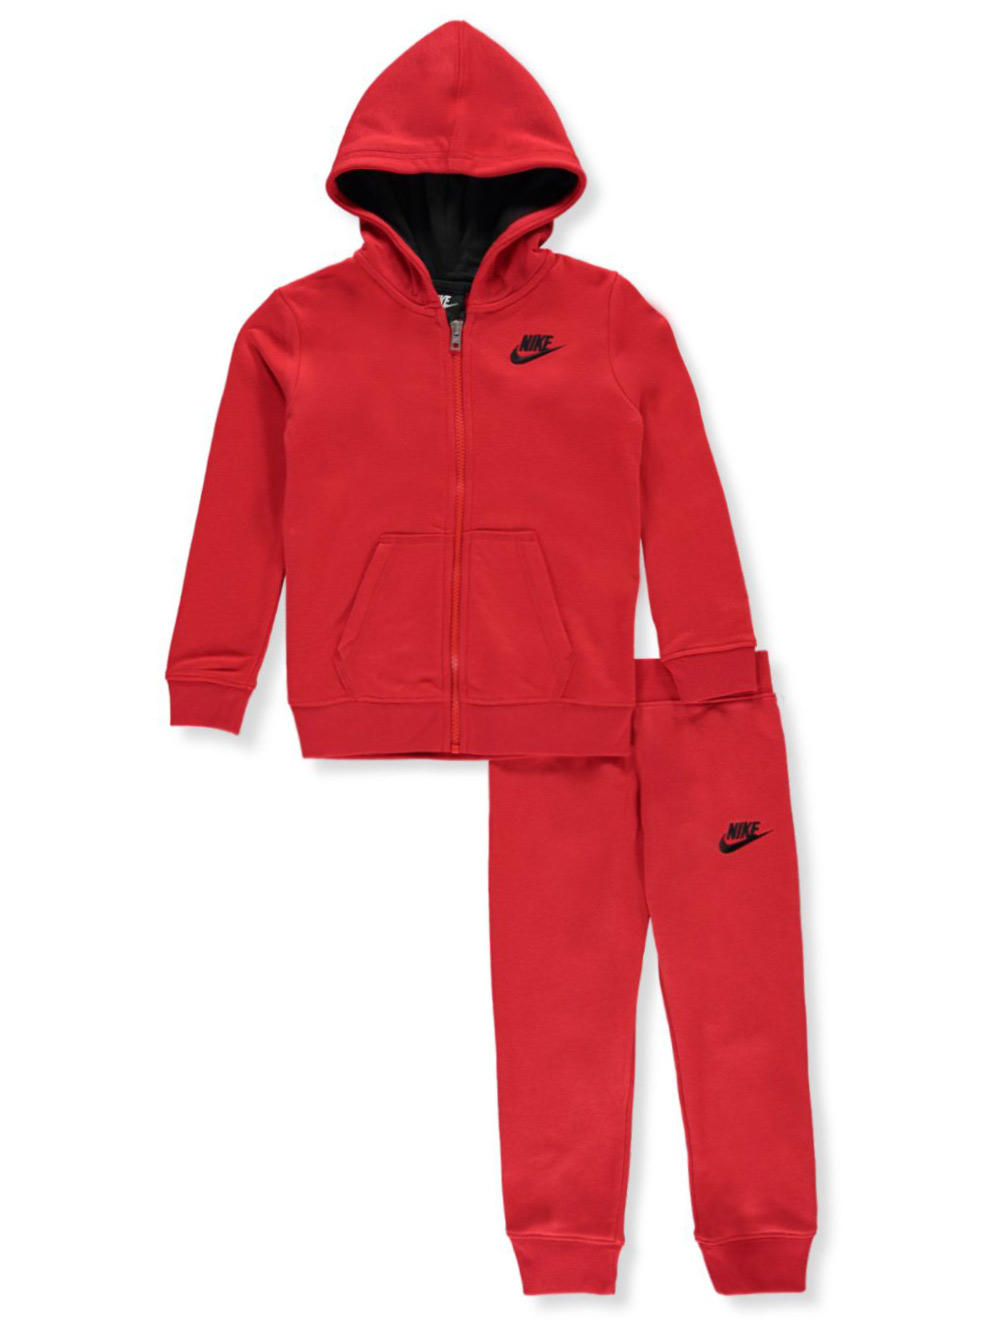 nike sweatsuit outfit